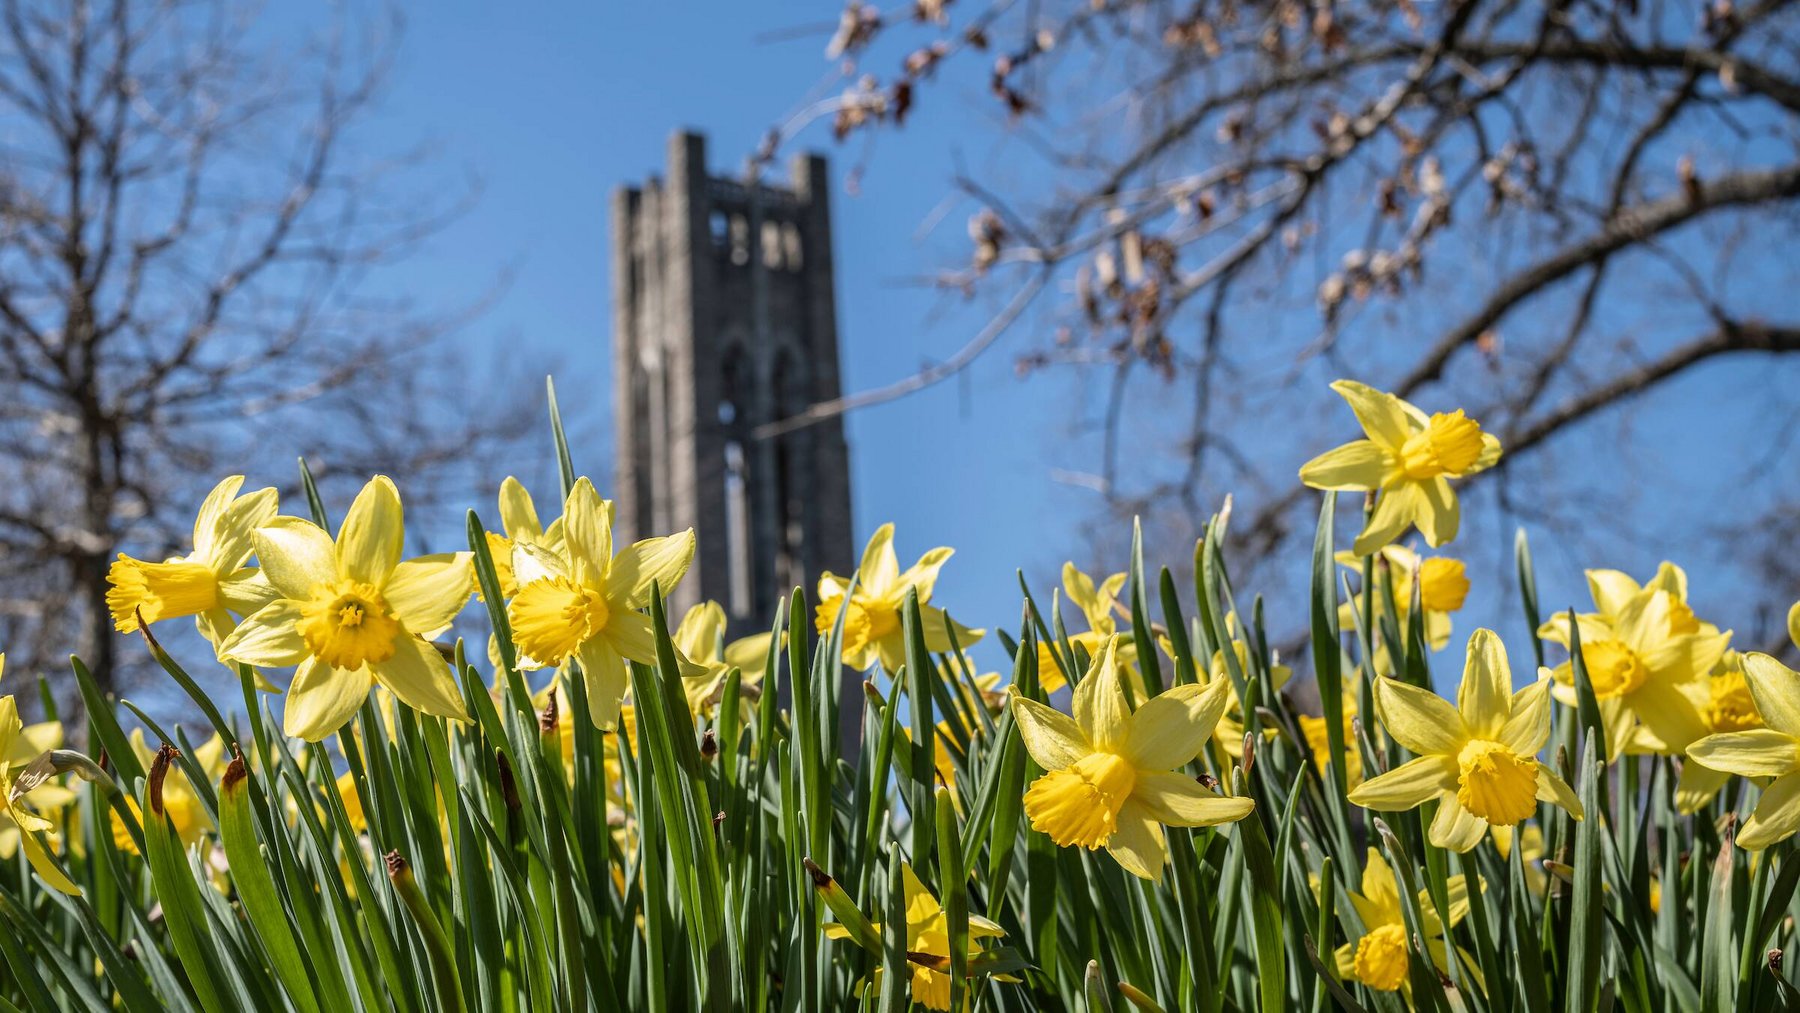 Clothier bell tower as seen from Parrish lawn, with daffodils in the foreground